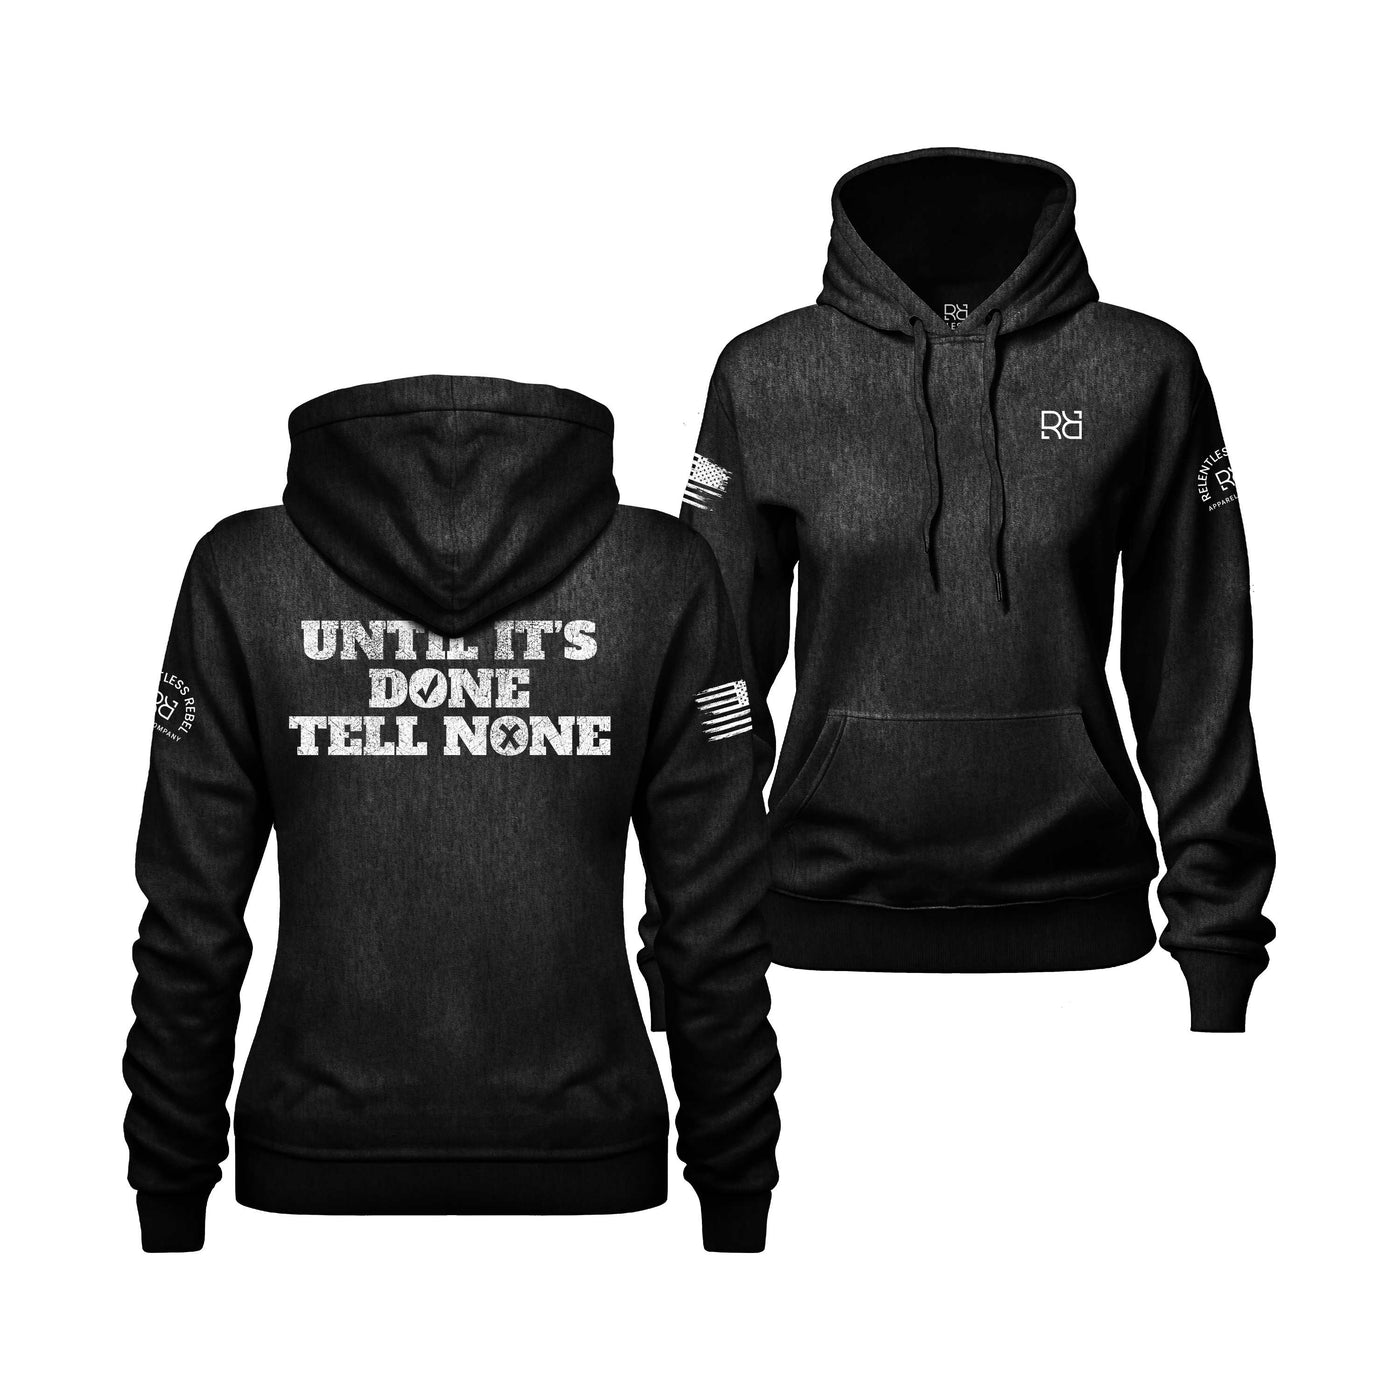 Until It's Done - Tell None | Women's Hoodie